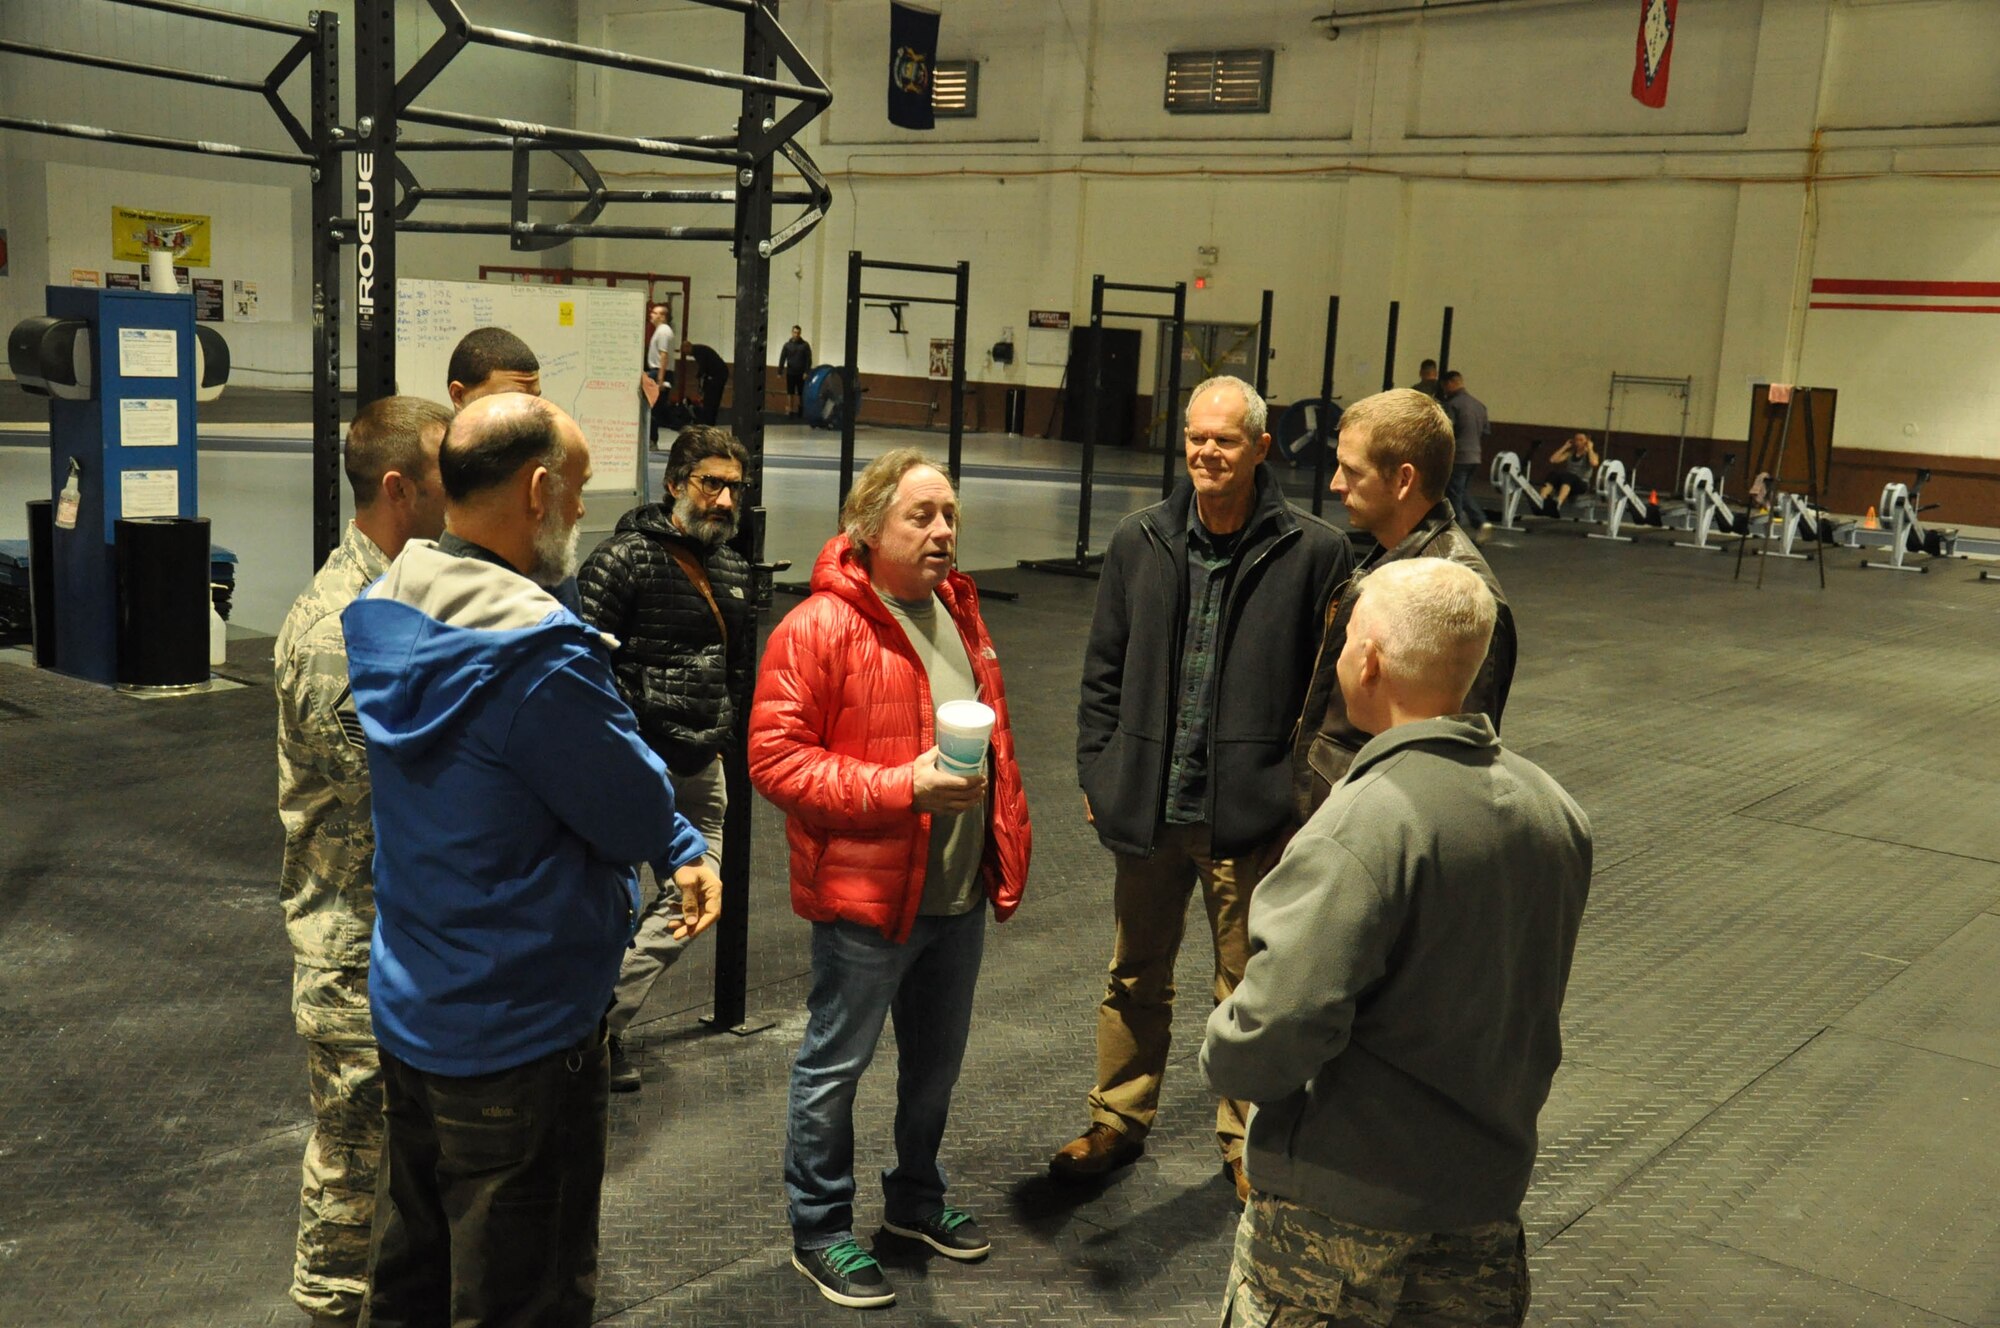 Coach Greg Glassman, founder and chief executive officer of CrossFit, and his team speaks with CrossFit Team Offutt Tactical Fitness coaches at the Offutt Field House Nov. 12. Glassman and his team visited with leadership from the Air Force Weather Agency, 55th Wing and U.S. Strategic Command and held four briefings for Team Offutt members during his two day visit. (U.S. Air Force photo by 2nd Lt. Carly A. Costello/Released)